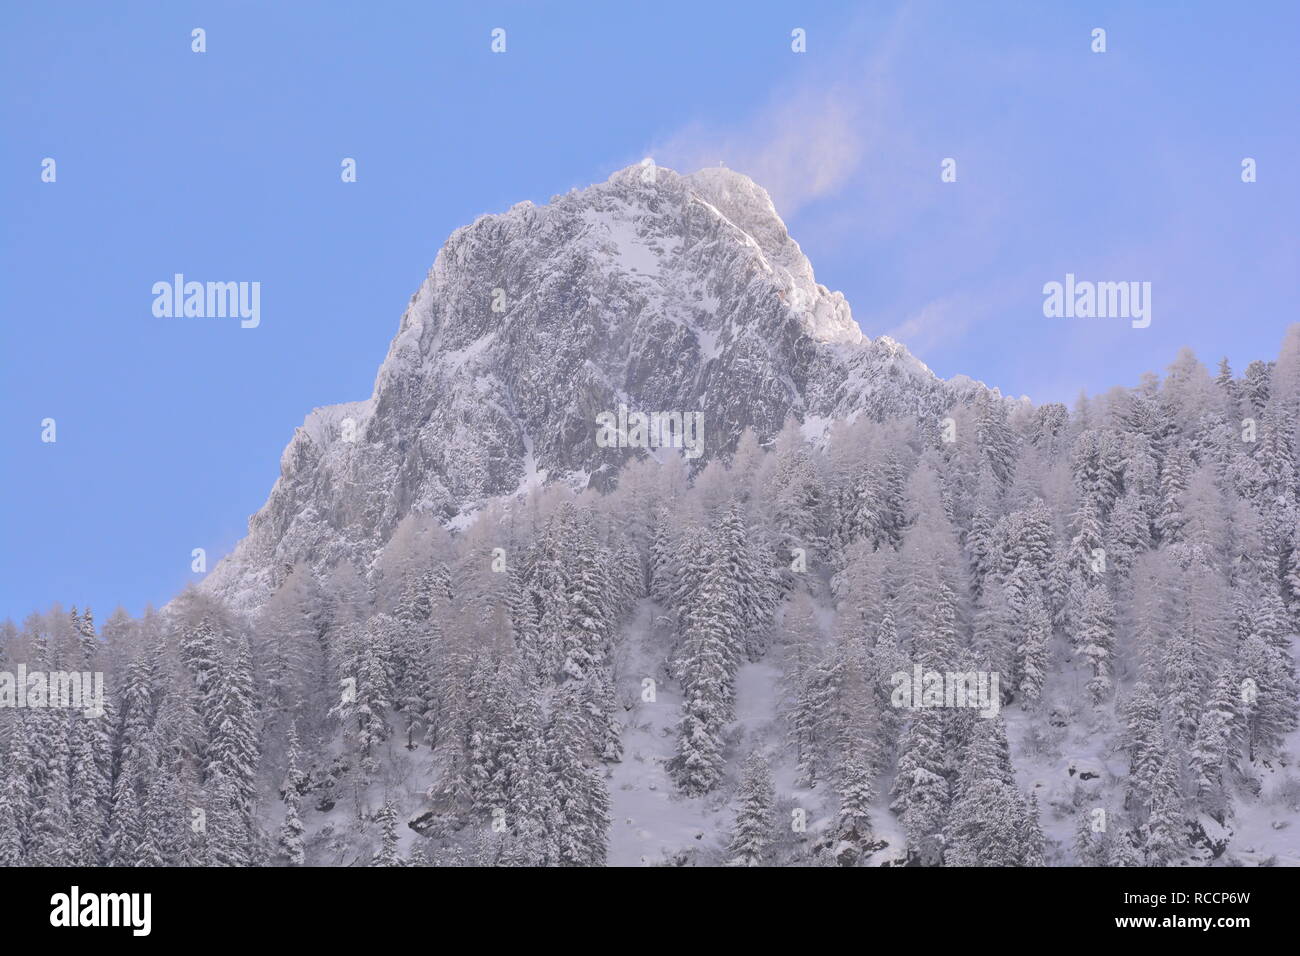 Snow covered mountain crests and forest. Winter scenery in Kaunertal valley, Tyrol , Austria. Snowy Austrian Alps. Forest and alpine crests Stock Photo